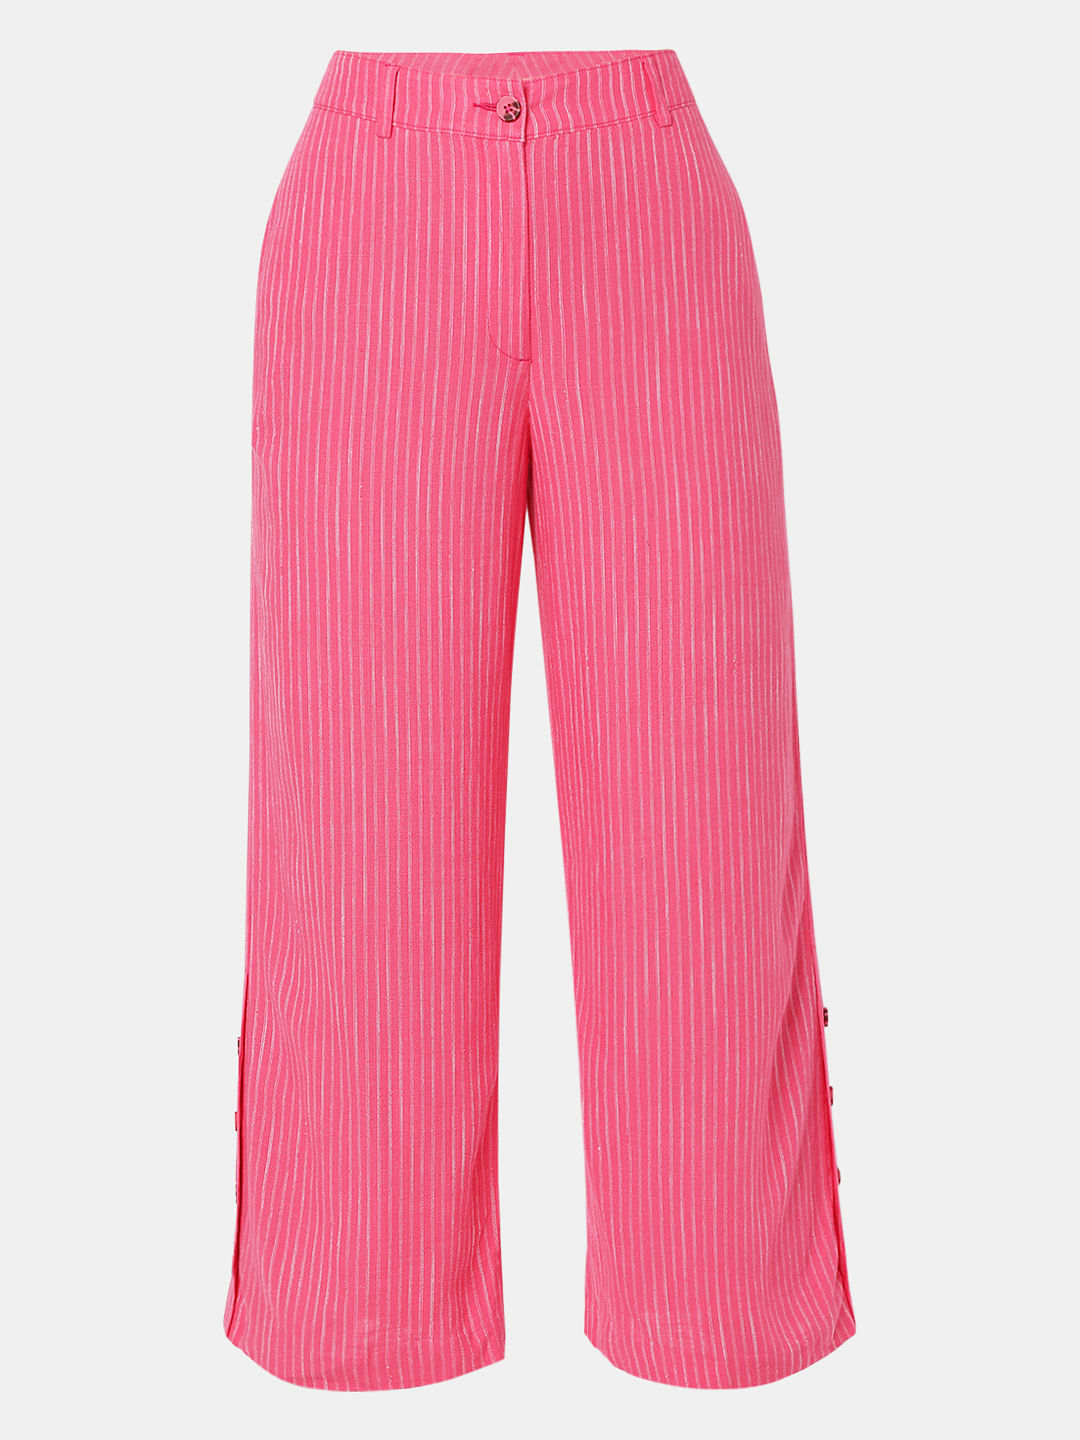 Vero Moda PANTS with Side Stripe 51  liked on Polyvore featuring pants  black tailored trous  Side stripe trousers Stripe pants outfit Casual  friday outfit